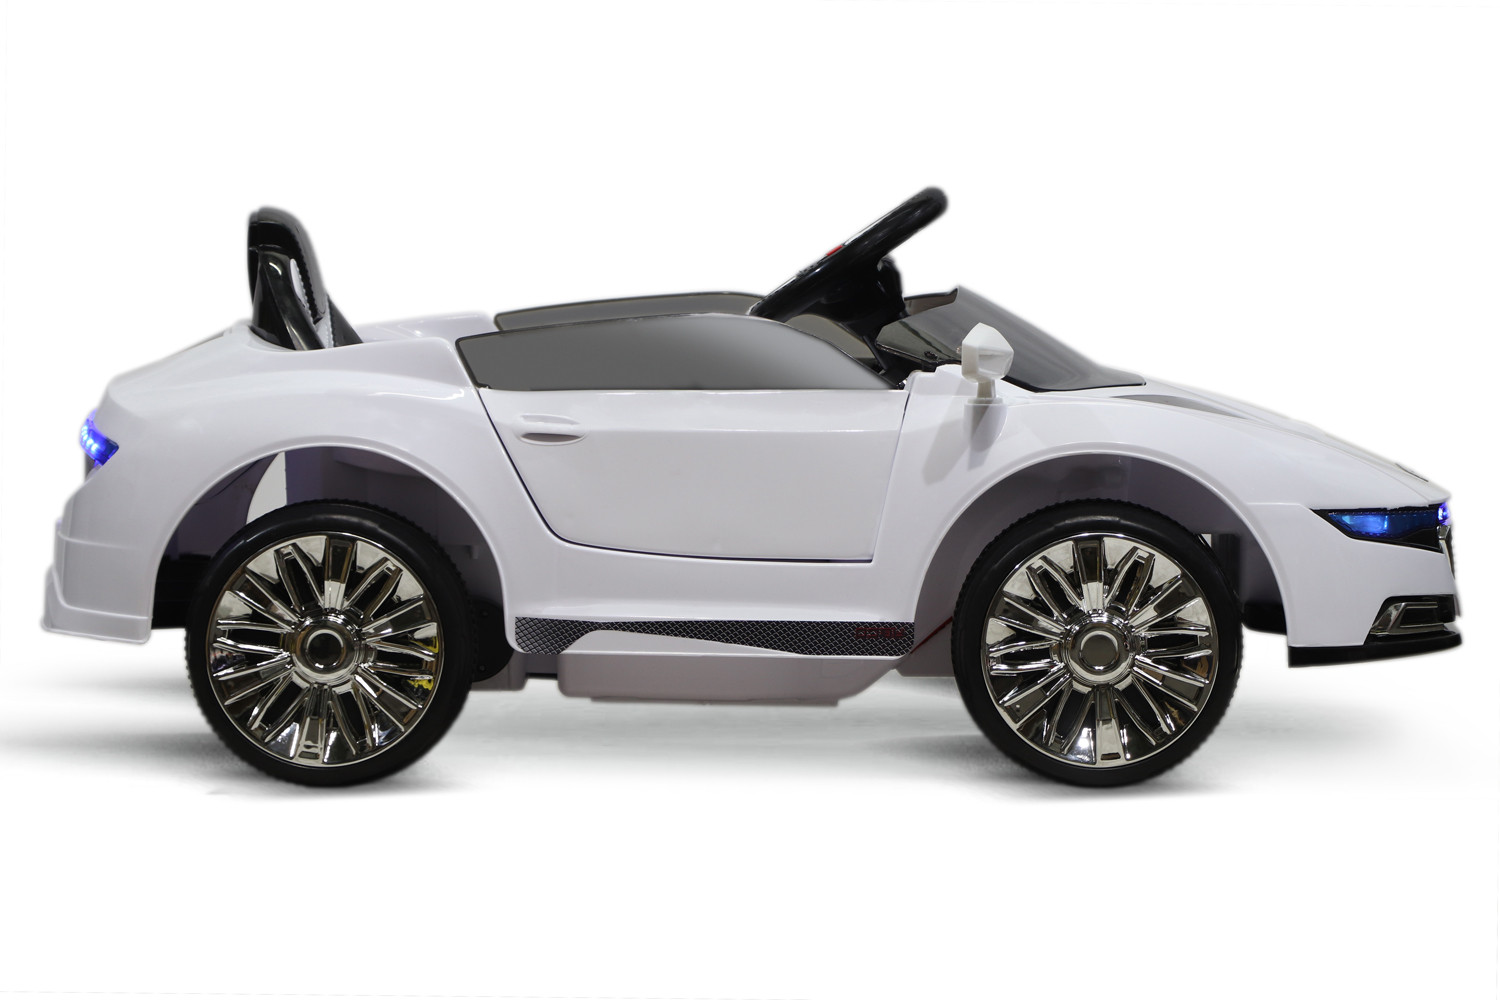 AD R COUPE AUDI 135 battery-powered car for children